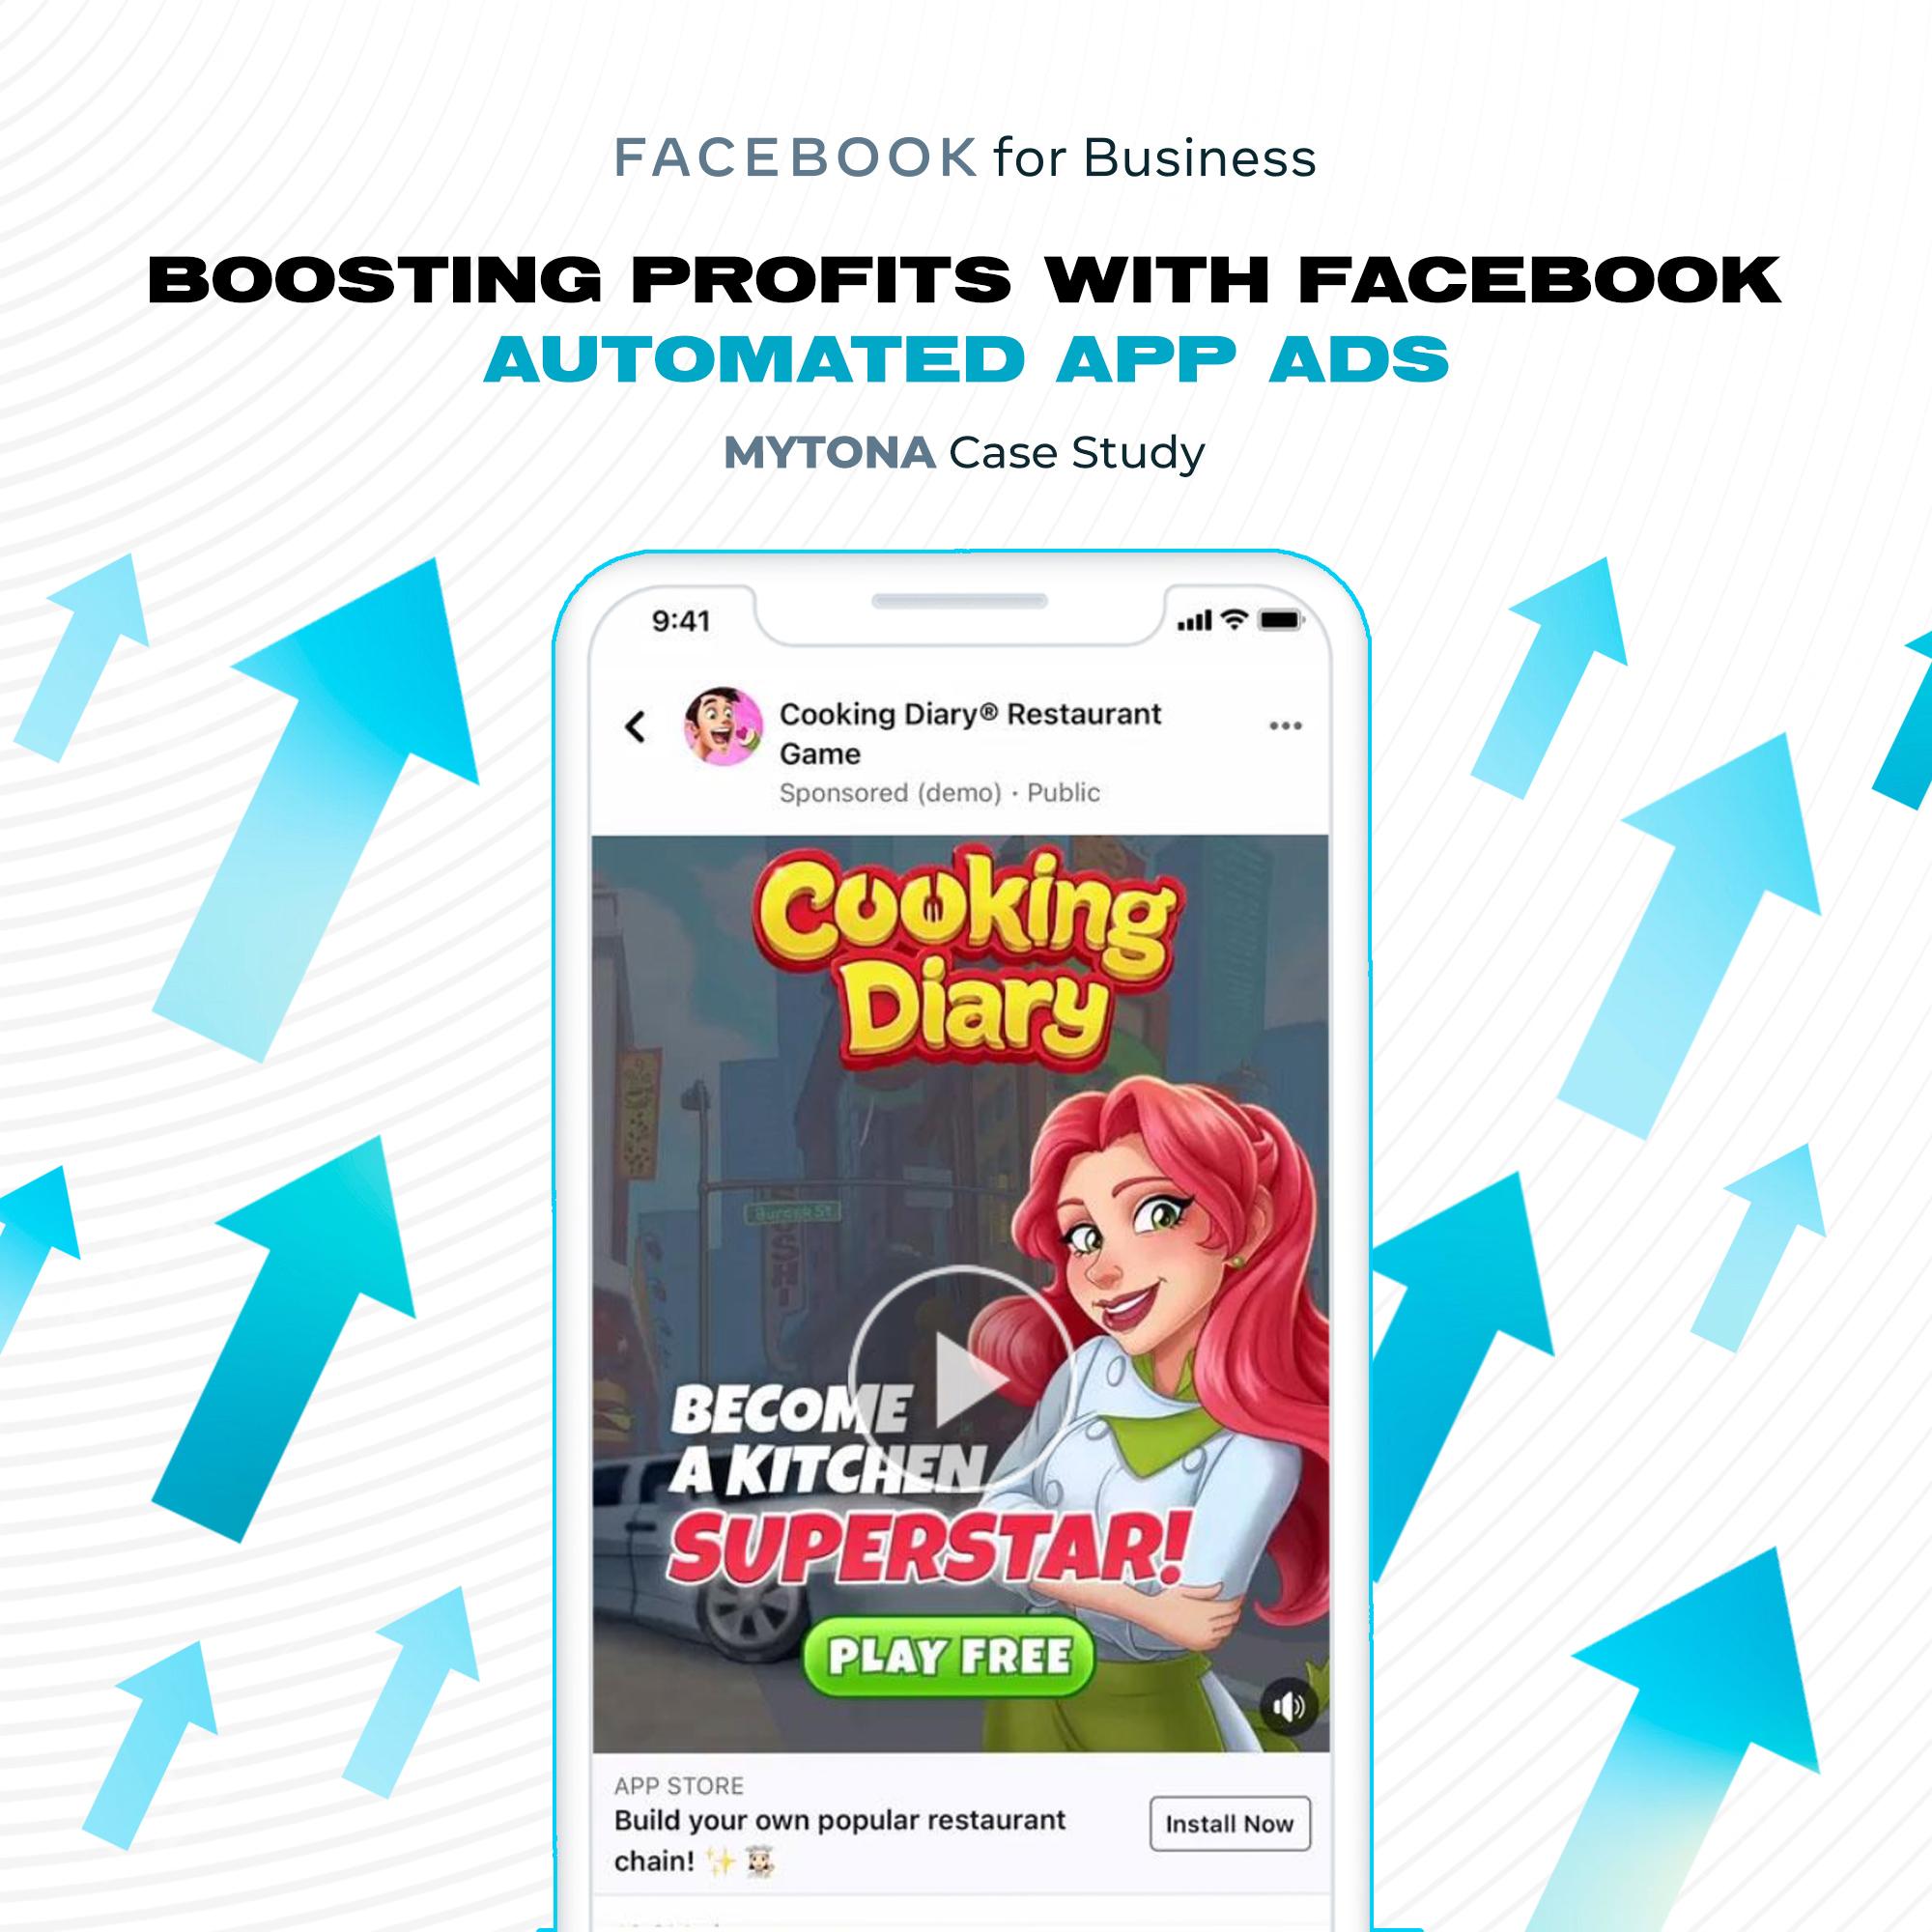 Boosting profits with Facebook Automated App Ads